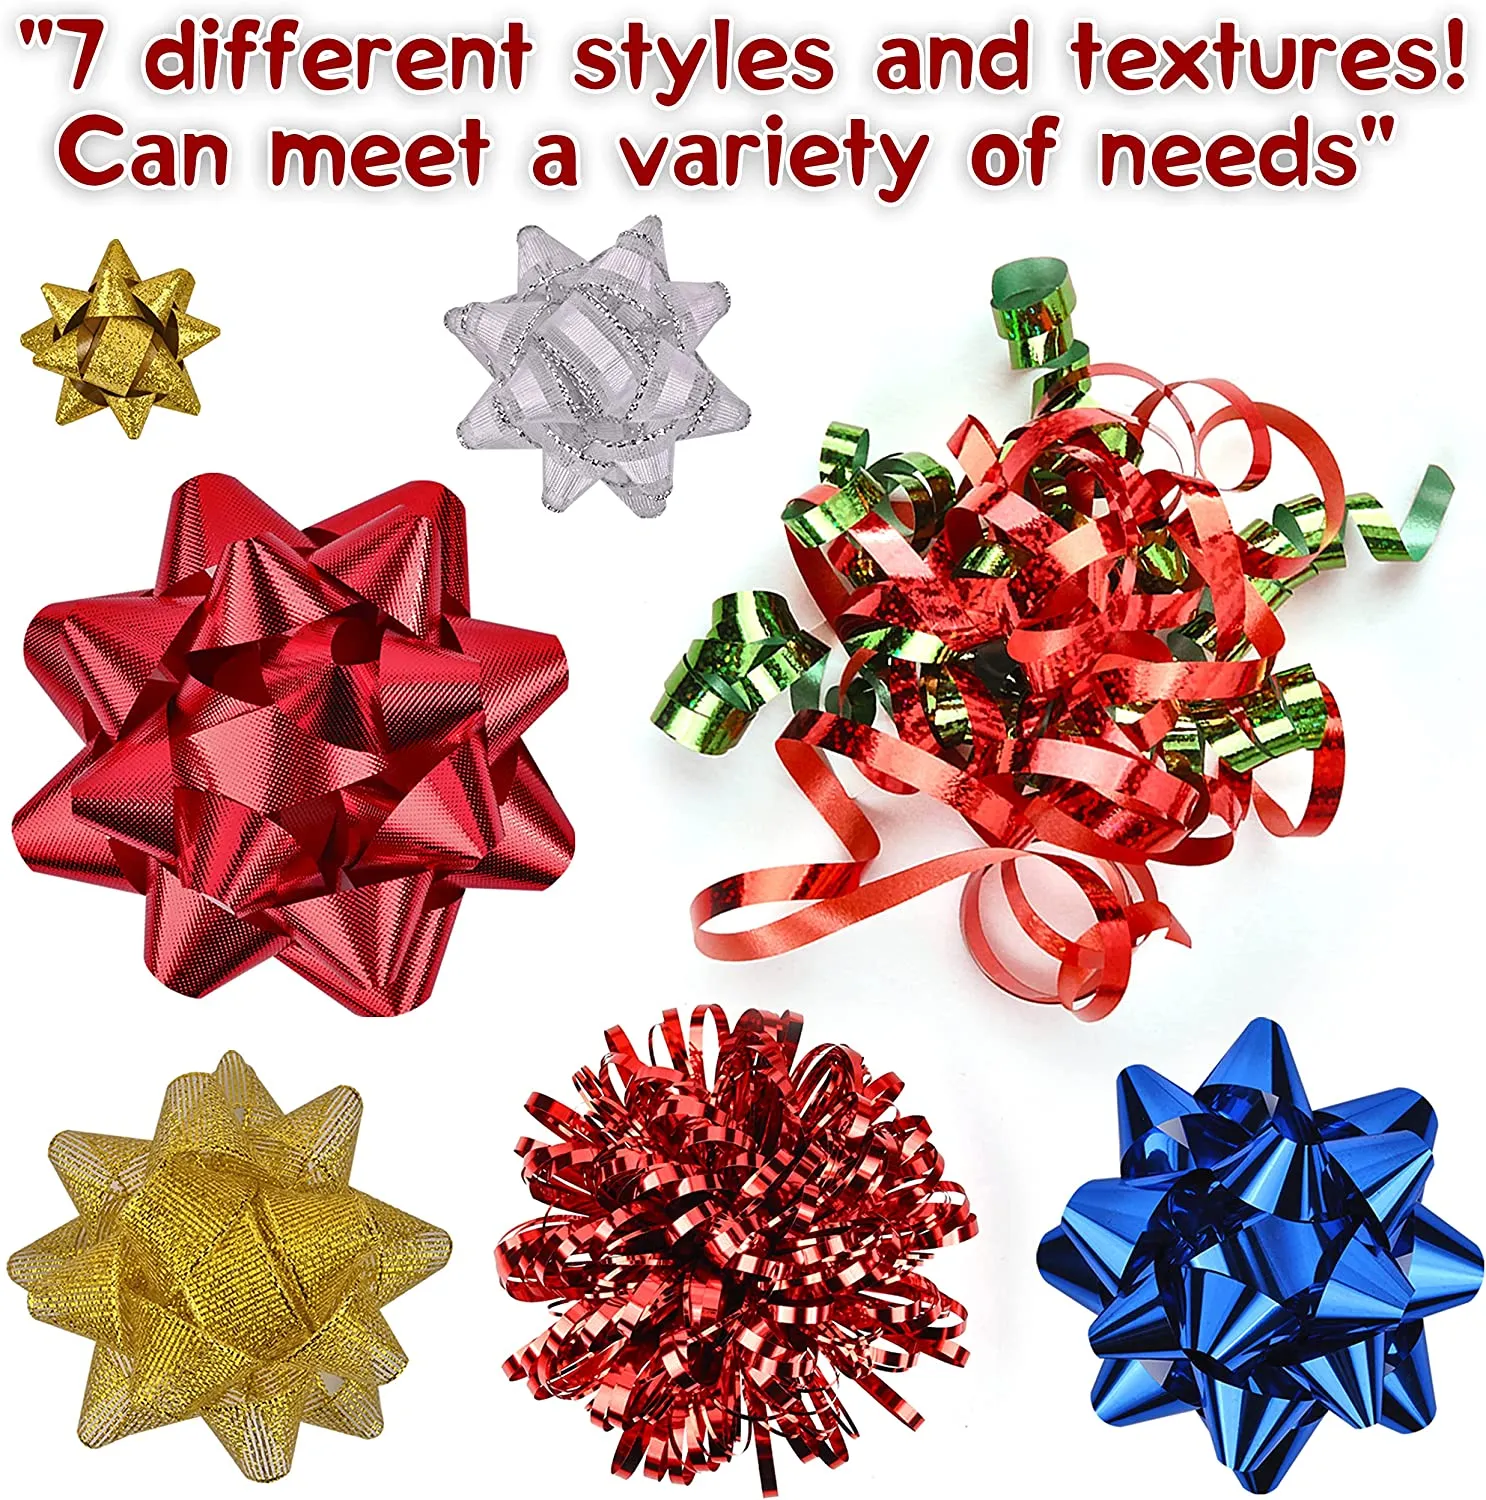 Bowdacious Gift Bows, 54 Christmas Holiday Bows, 3D Looking Self-Adhesive Gift Bows with Foil Accents and Attached Gift Tag, Perfect for Christmas and